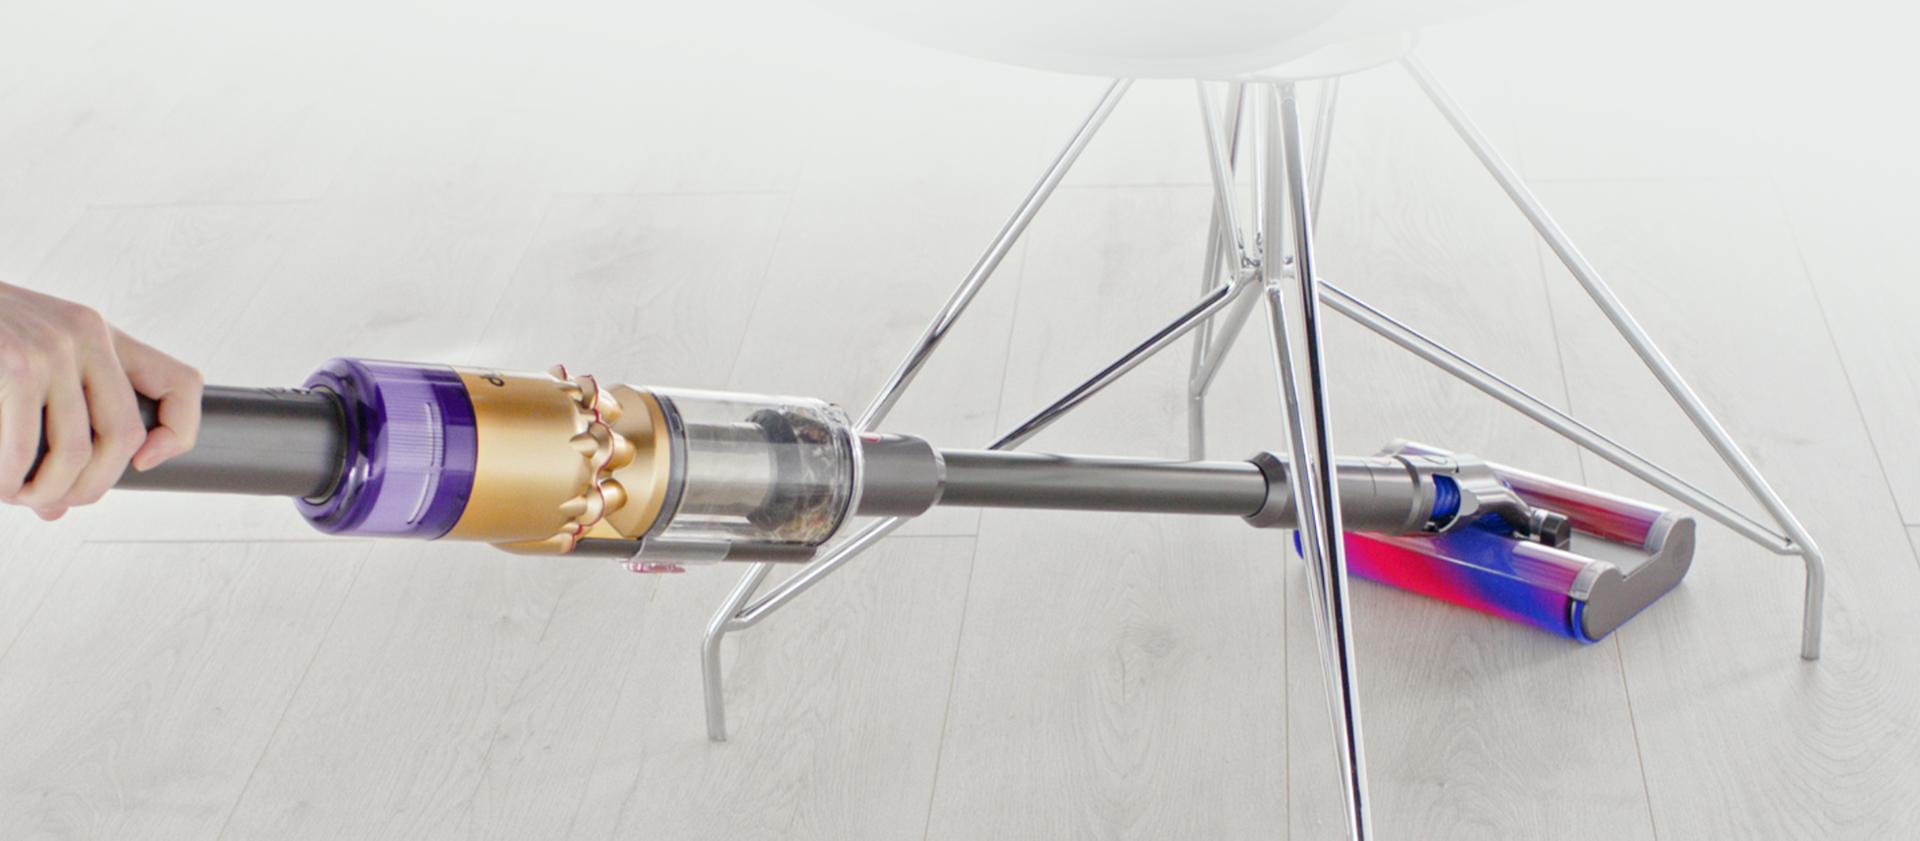  Video of Dyson Omni-glide™ vacuum manoeuvring around a table leg.